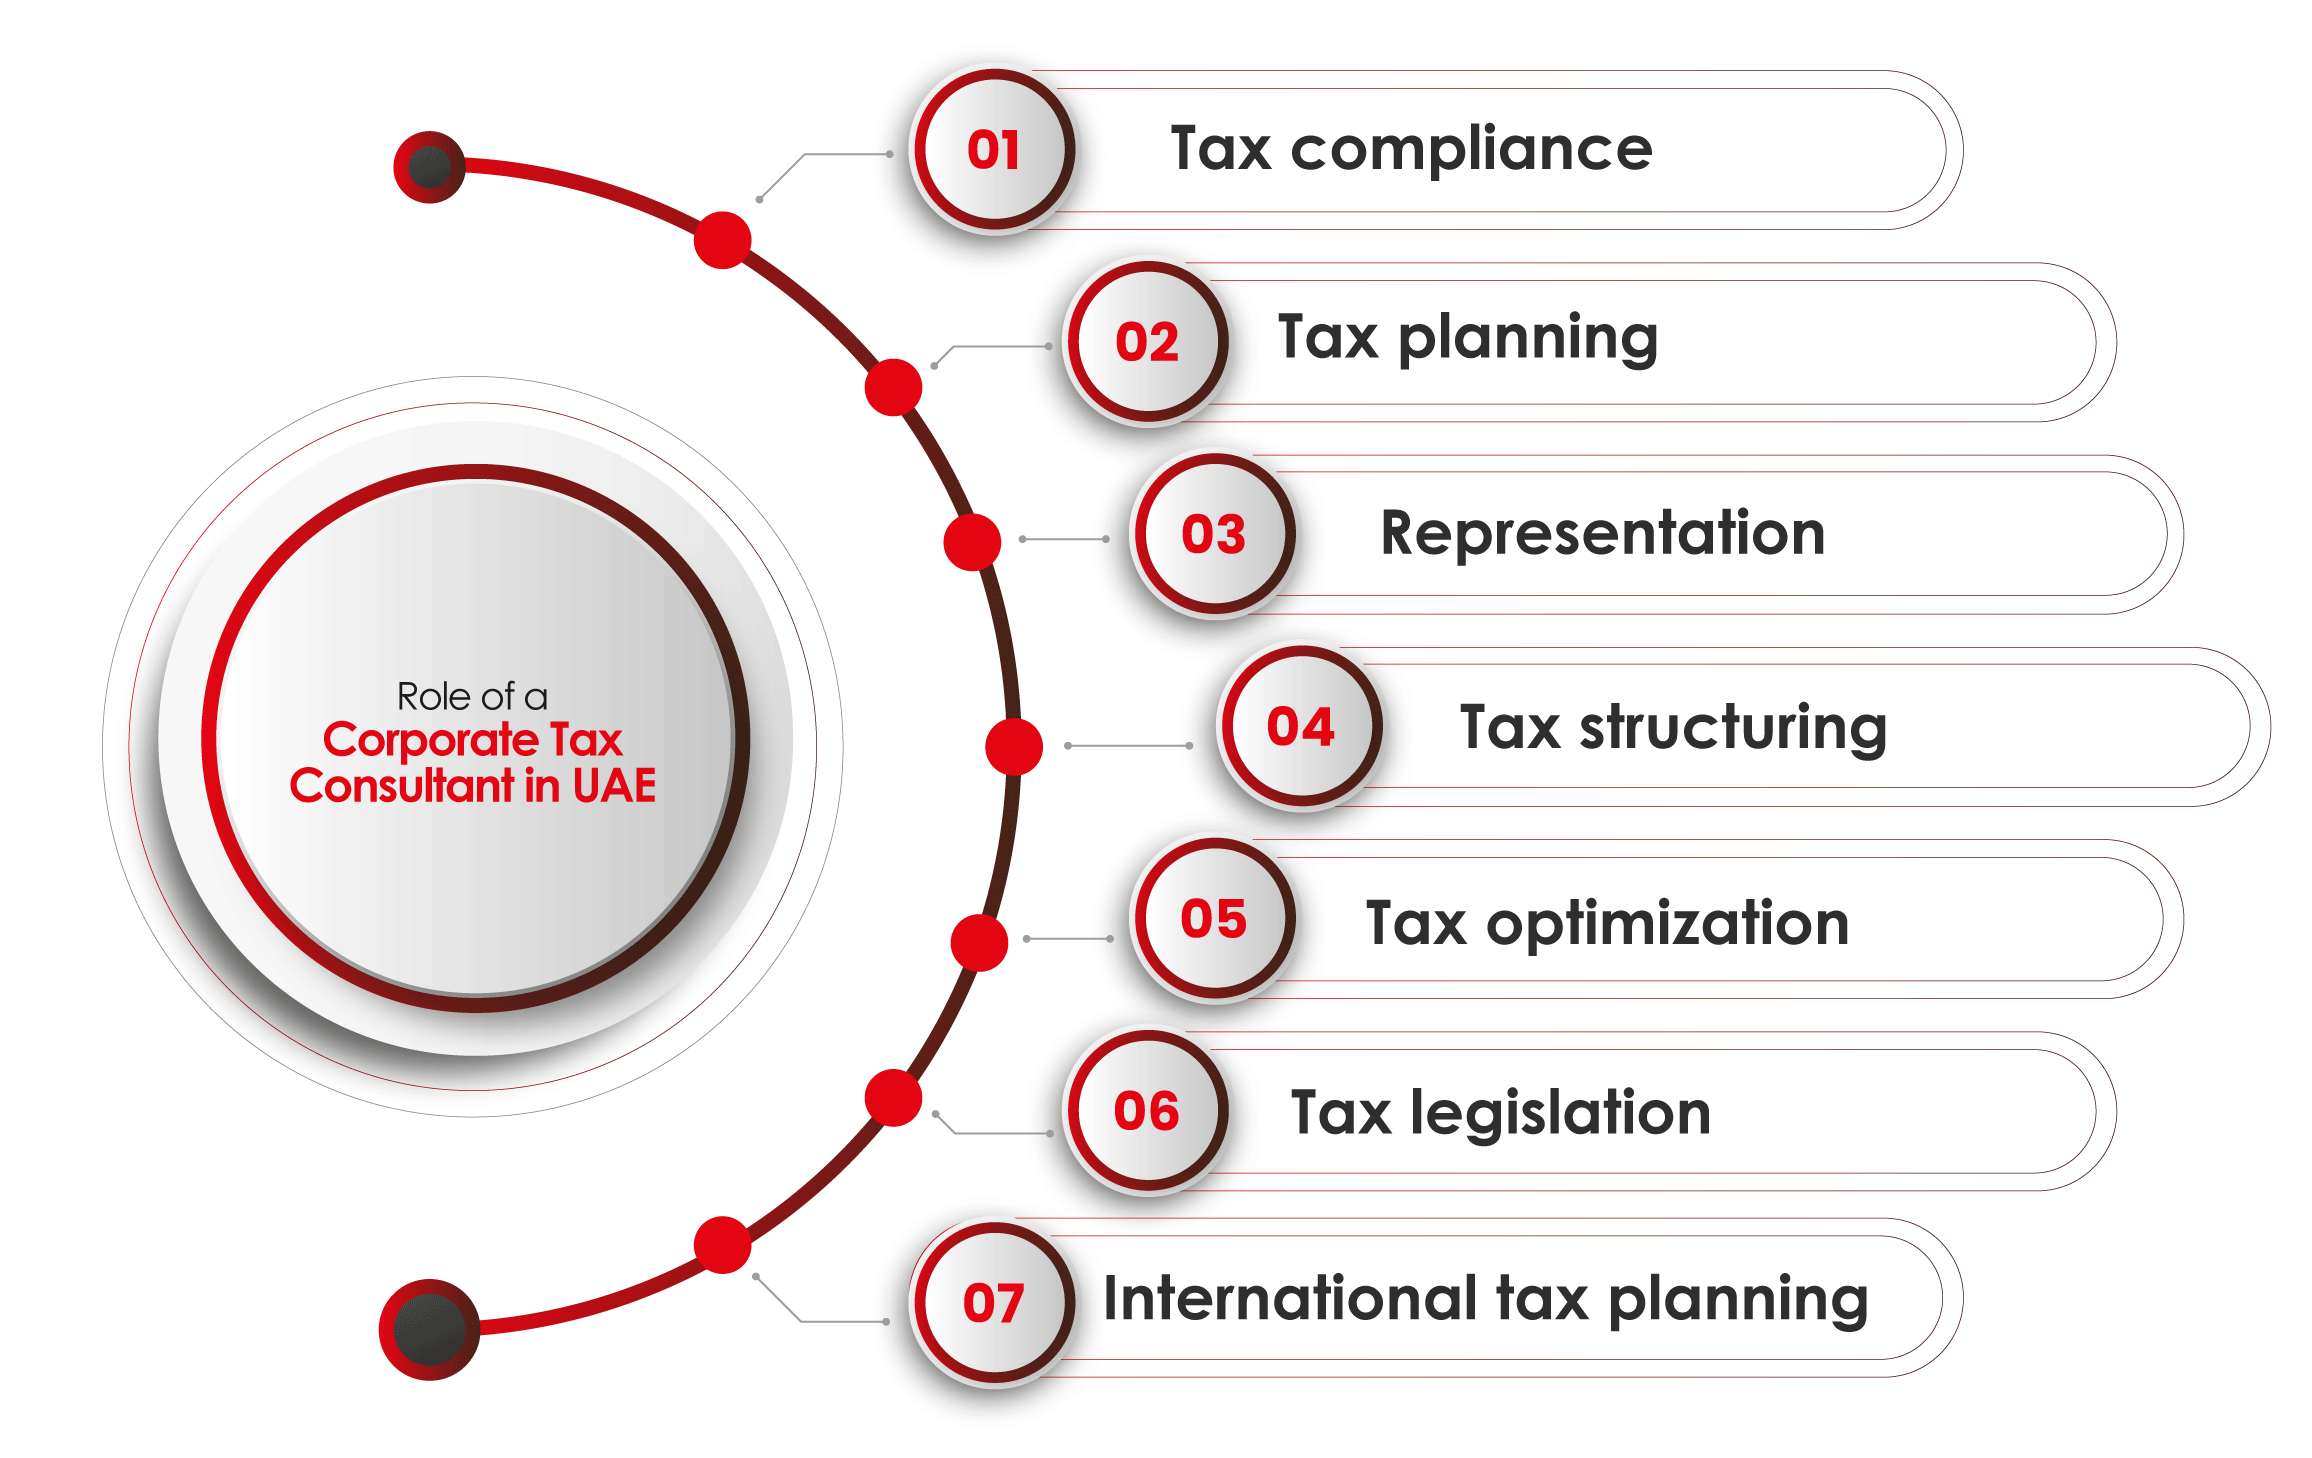 Infographic view on Corporate tax services provided by corporate tax consultants in UAE